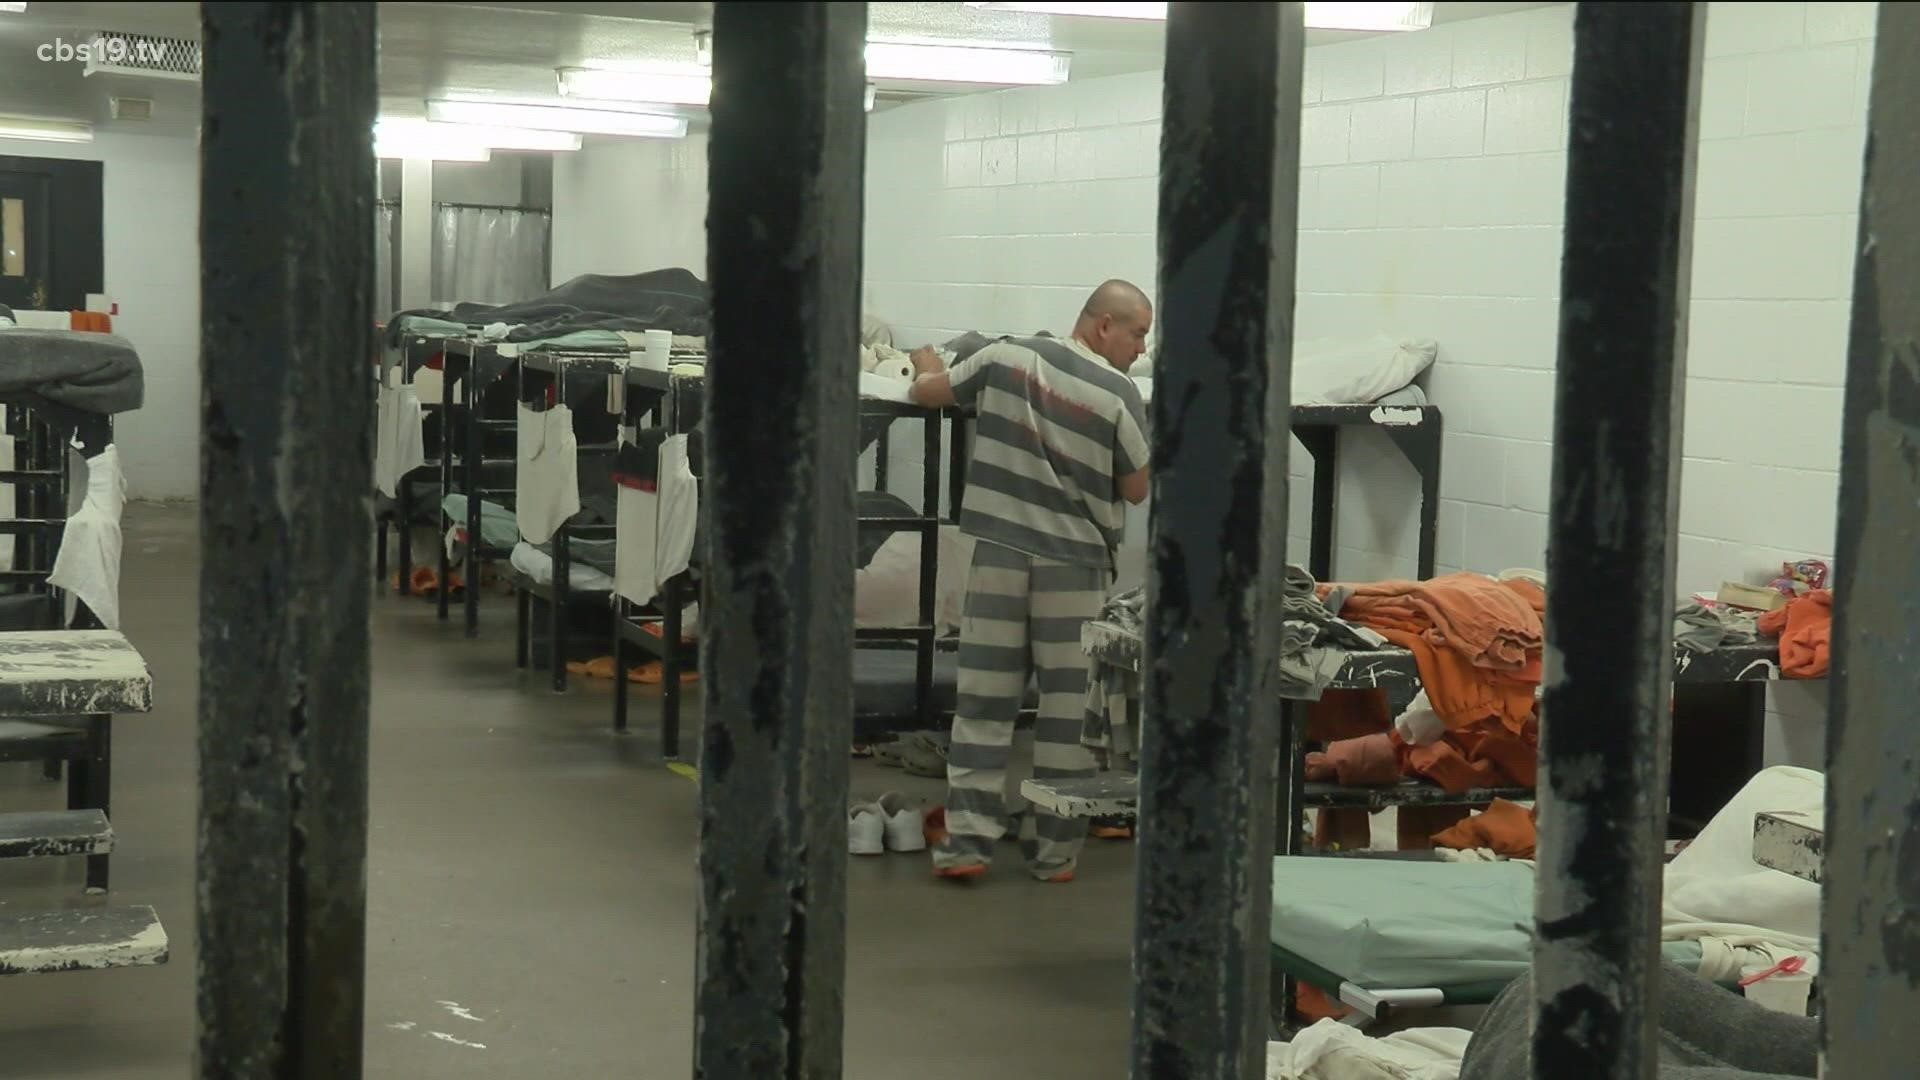 Reports of overcrowding and non-compliance inside East Texas jails have soared.
Officials discuss issues inside the facilities and how they can be solved.